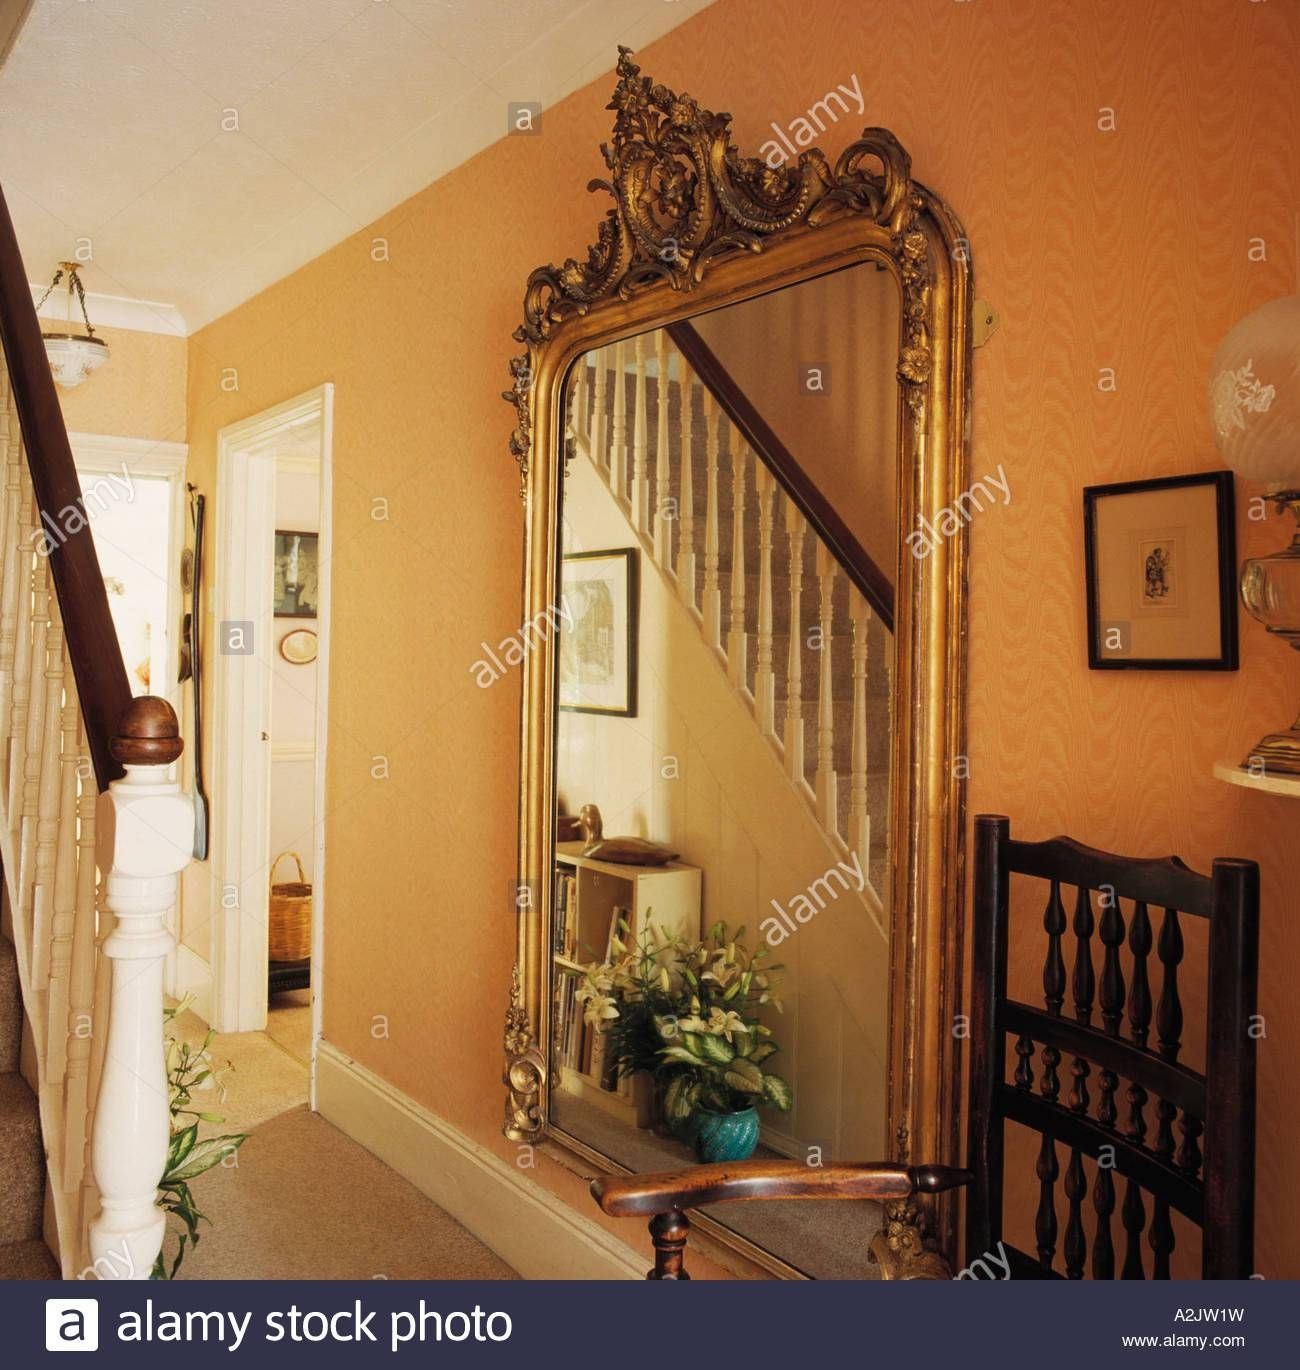 Large Gilt Mirror In Yellow Hall Stock Photo, Royalty Free Image Within Large Gilt Mirrors (View 12 of 25)